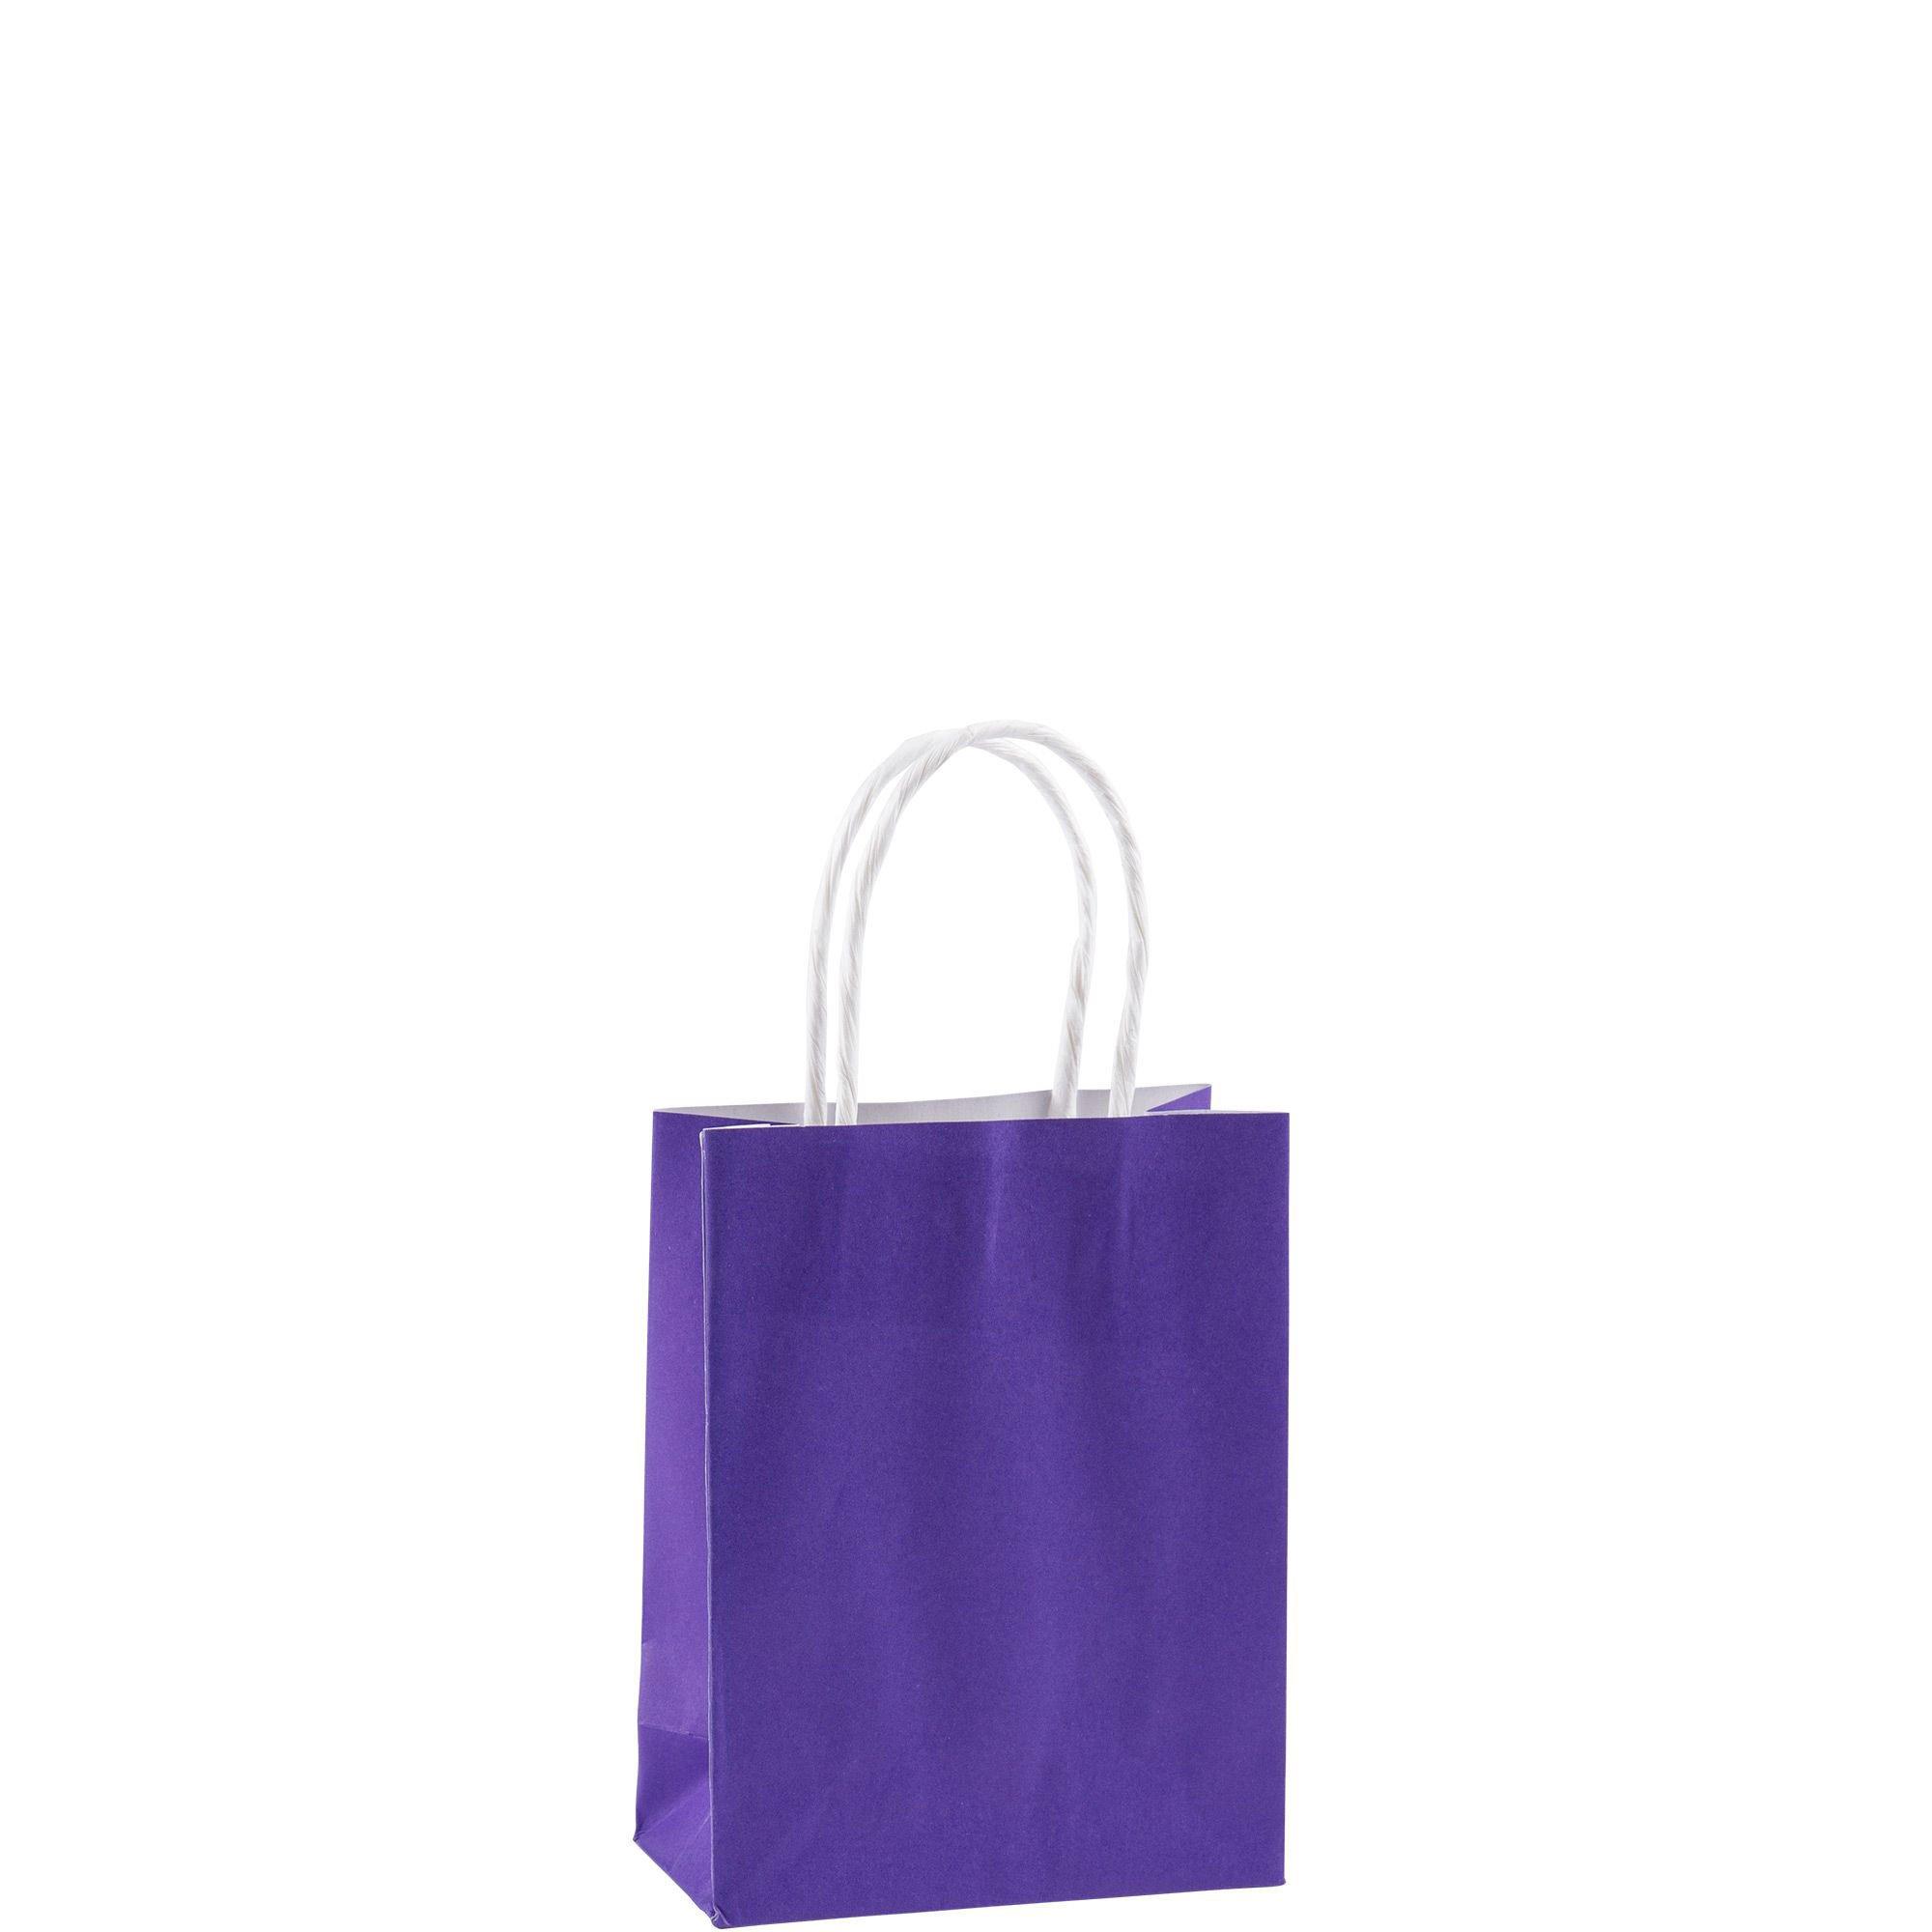 Purple Gift Bags: 24 Bulk Pack Medium Gift Bags with Handle. Great for  Halloween Gifts, Holiday, Party Favor, Trick or Treat, Goodie, Candies 